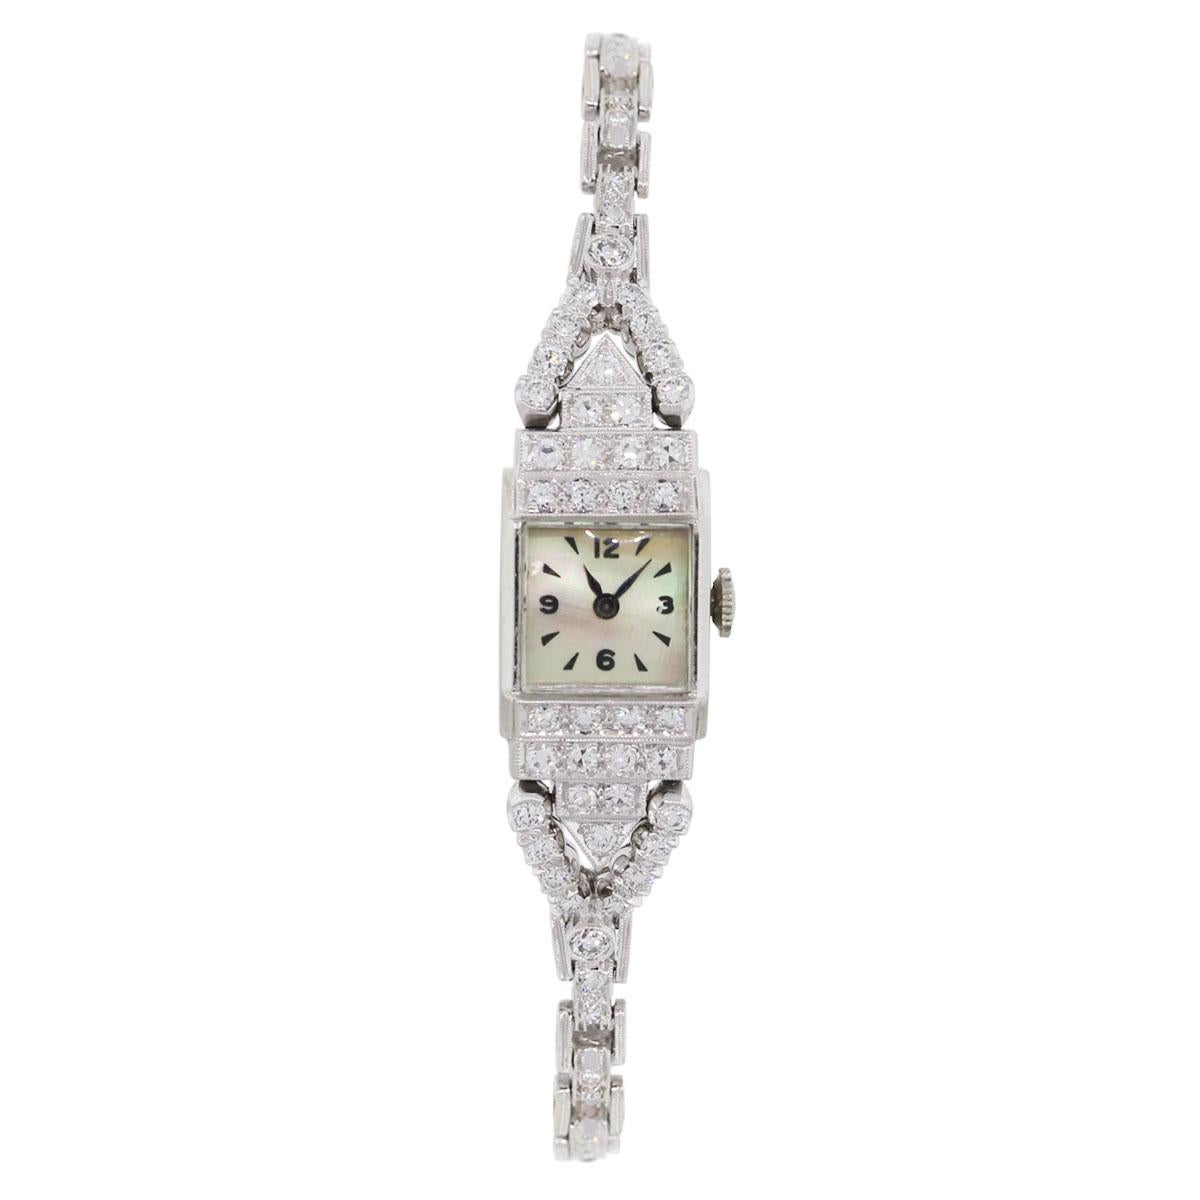 Case Material: Platinum
Diamond Details: Approximately 2.20ctw of round brilliant diamonds. Diamonds are G/H in color and SI in clarity
Dial: Mother of pearl dial with black hour markers
Bracelet: Platinum diamond pave bracelet
Case Measurements: